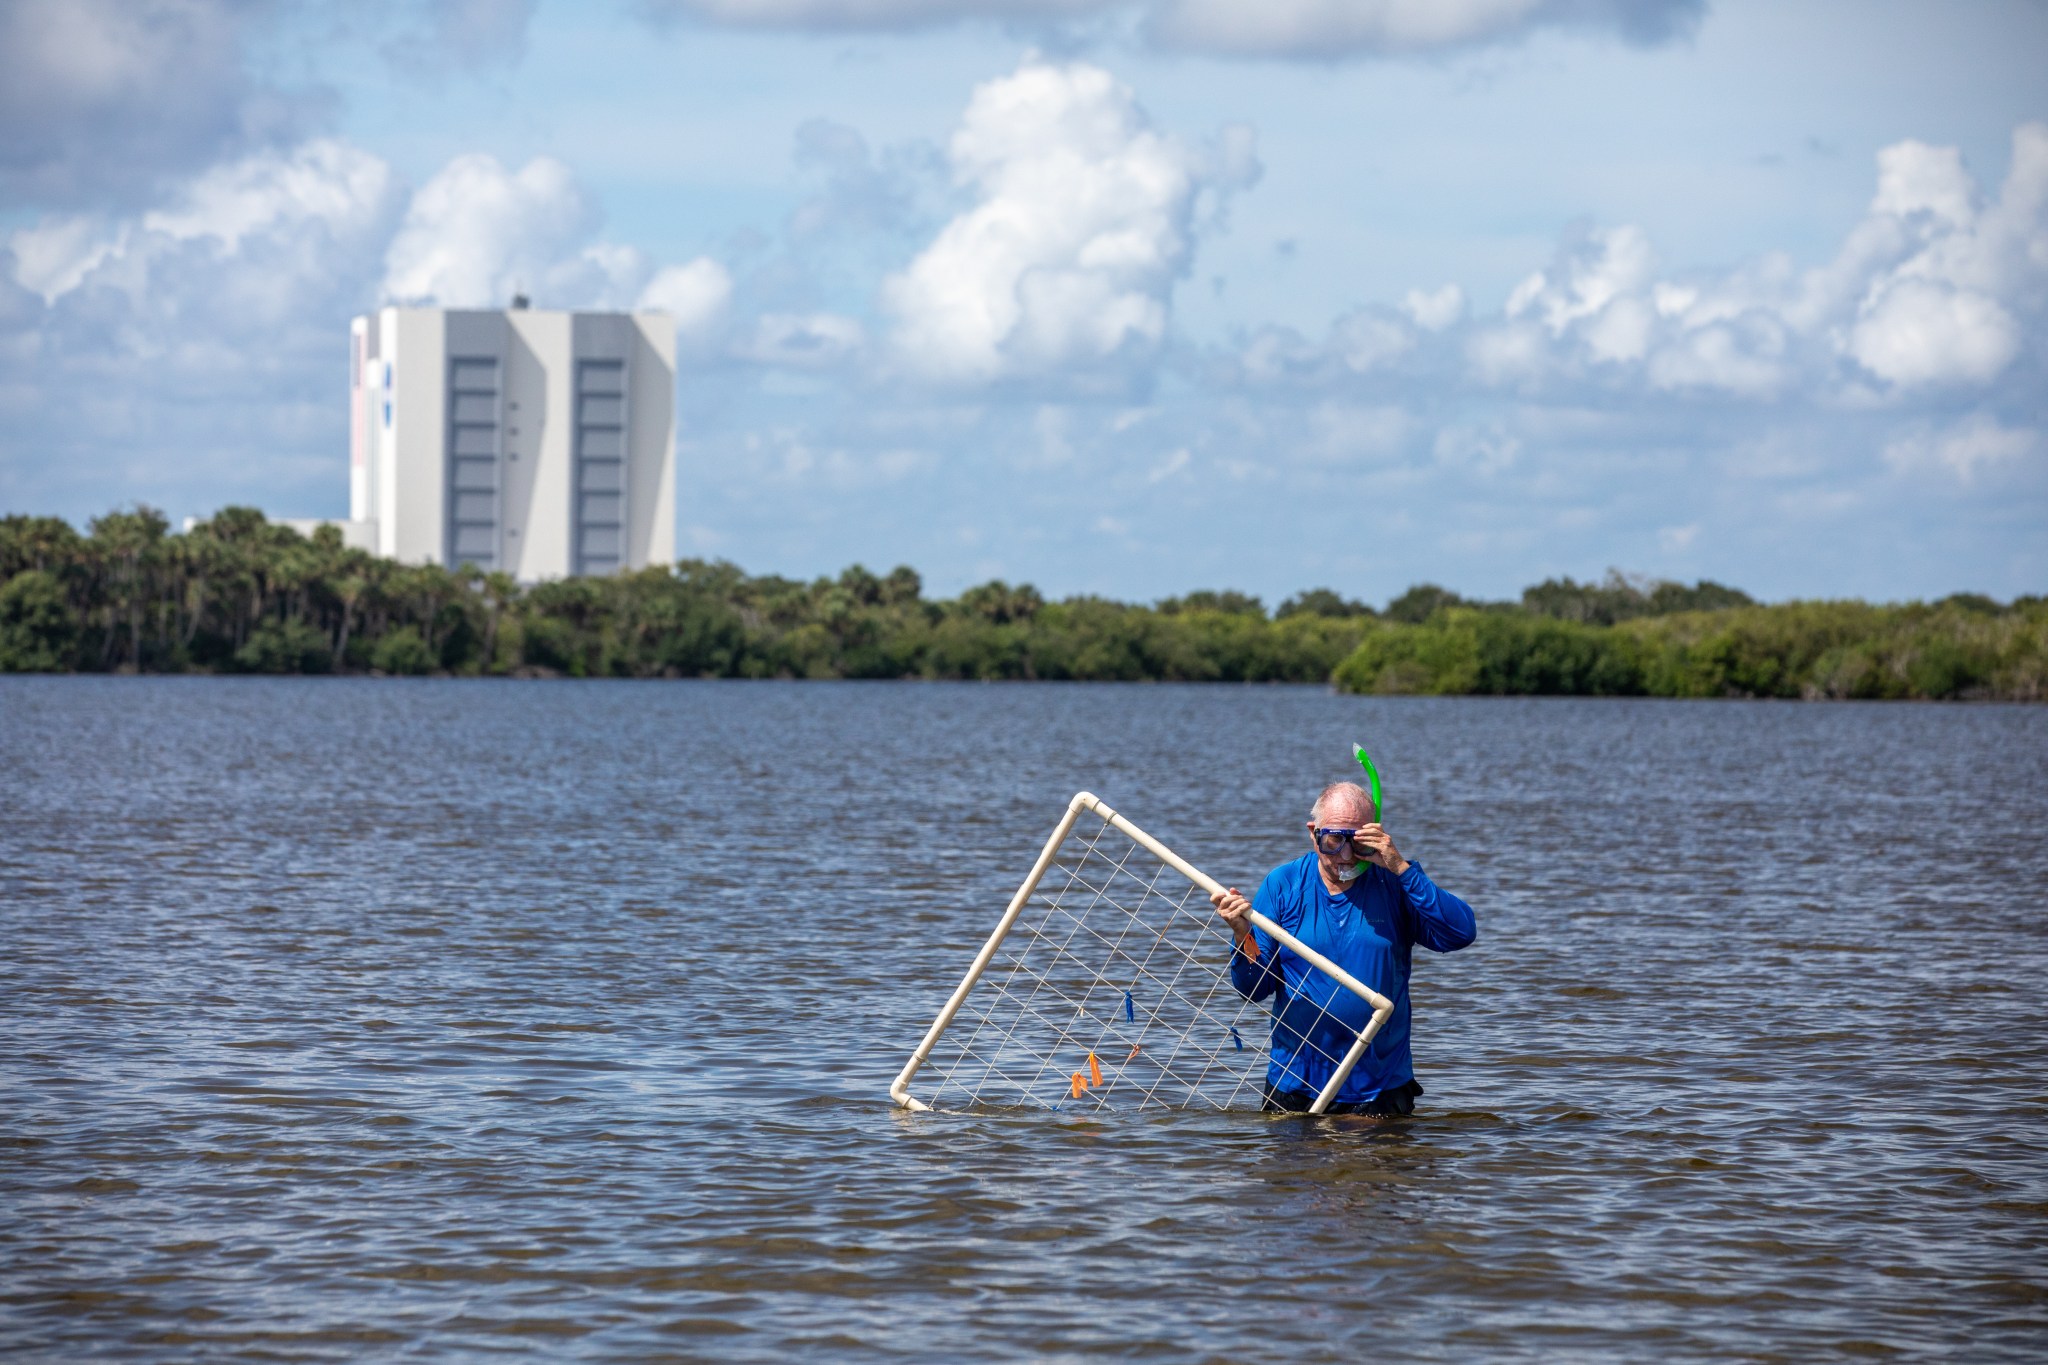 NASA's Doug Scheidt measures seagrass density at Pepper Flats, just south of the visitors gantry.